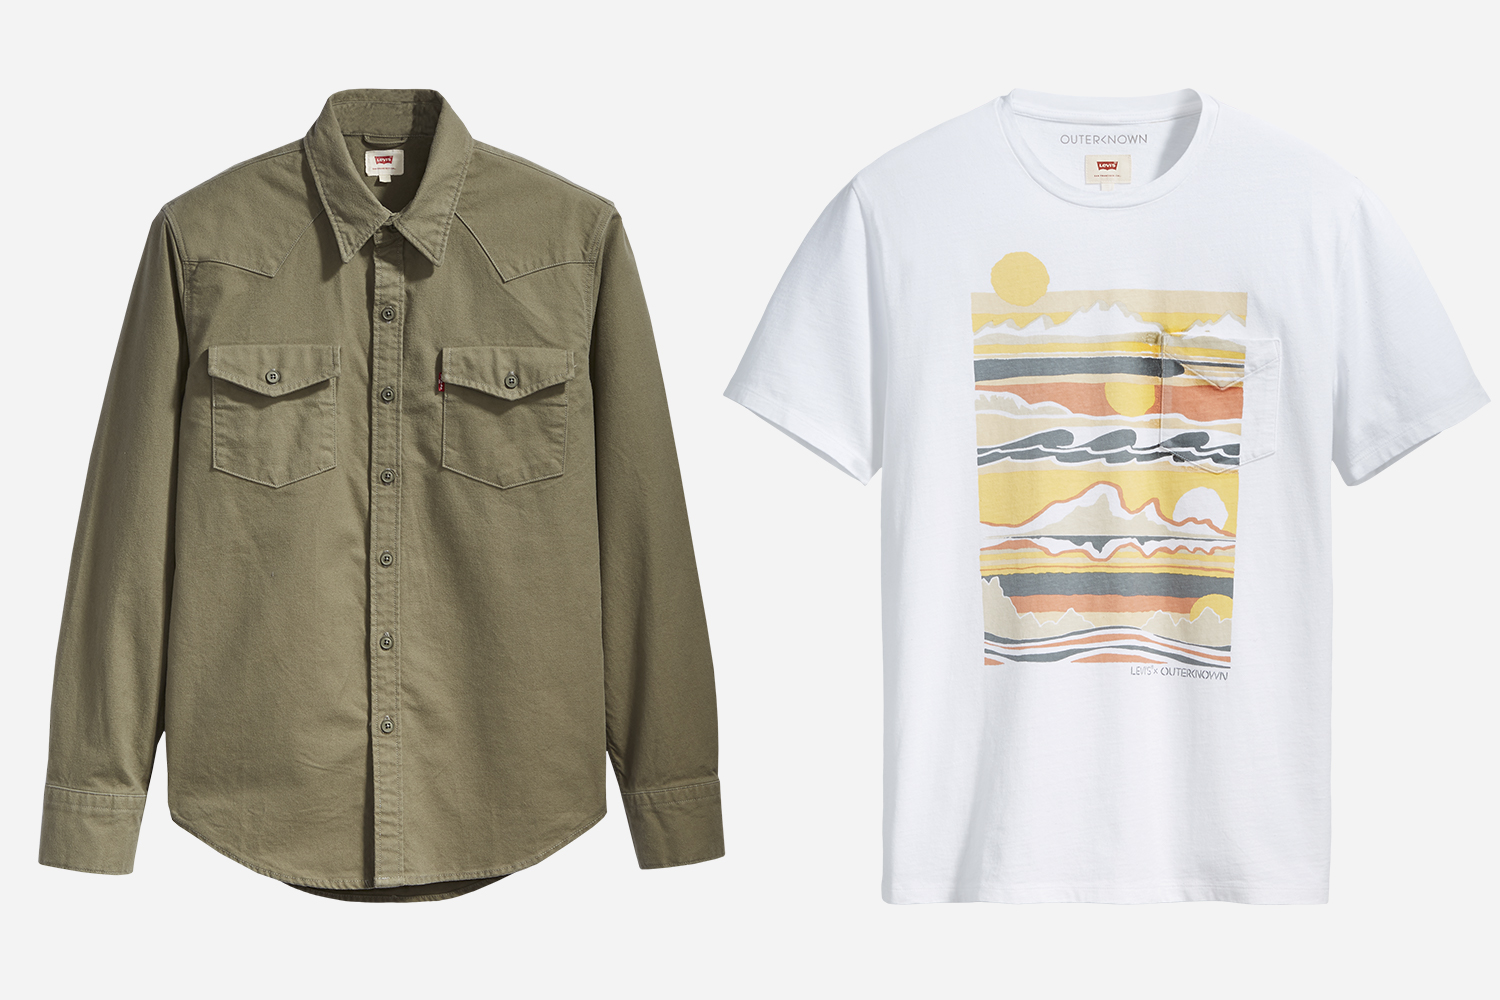 Levi's Wellthread x Outerknown Western Shirts and Pocket Tees